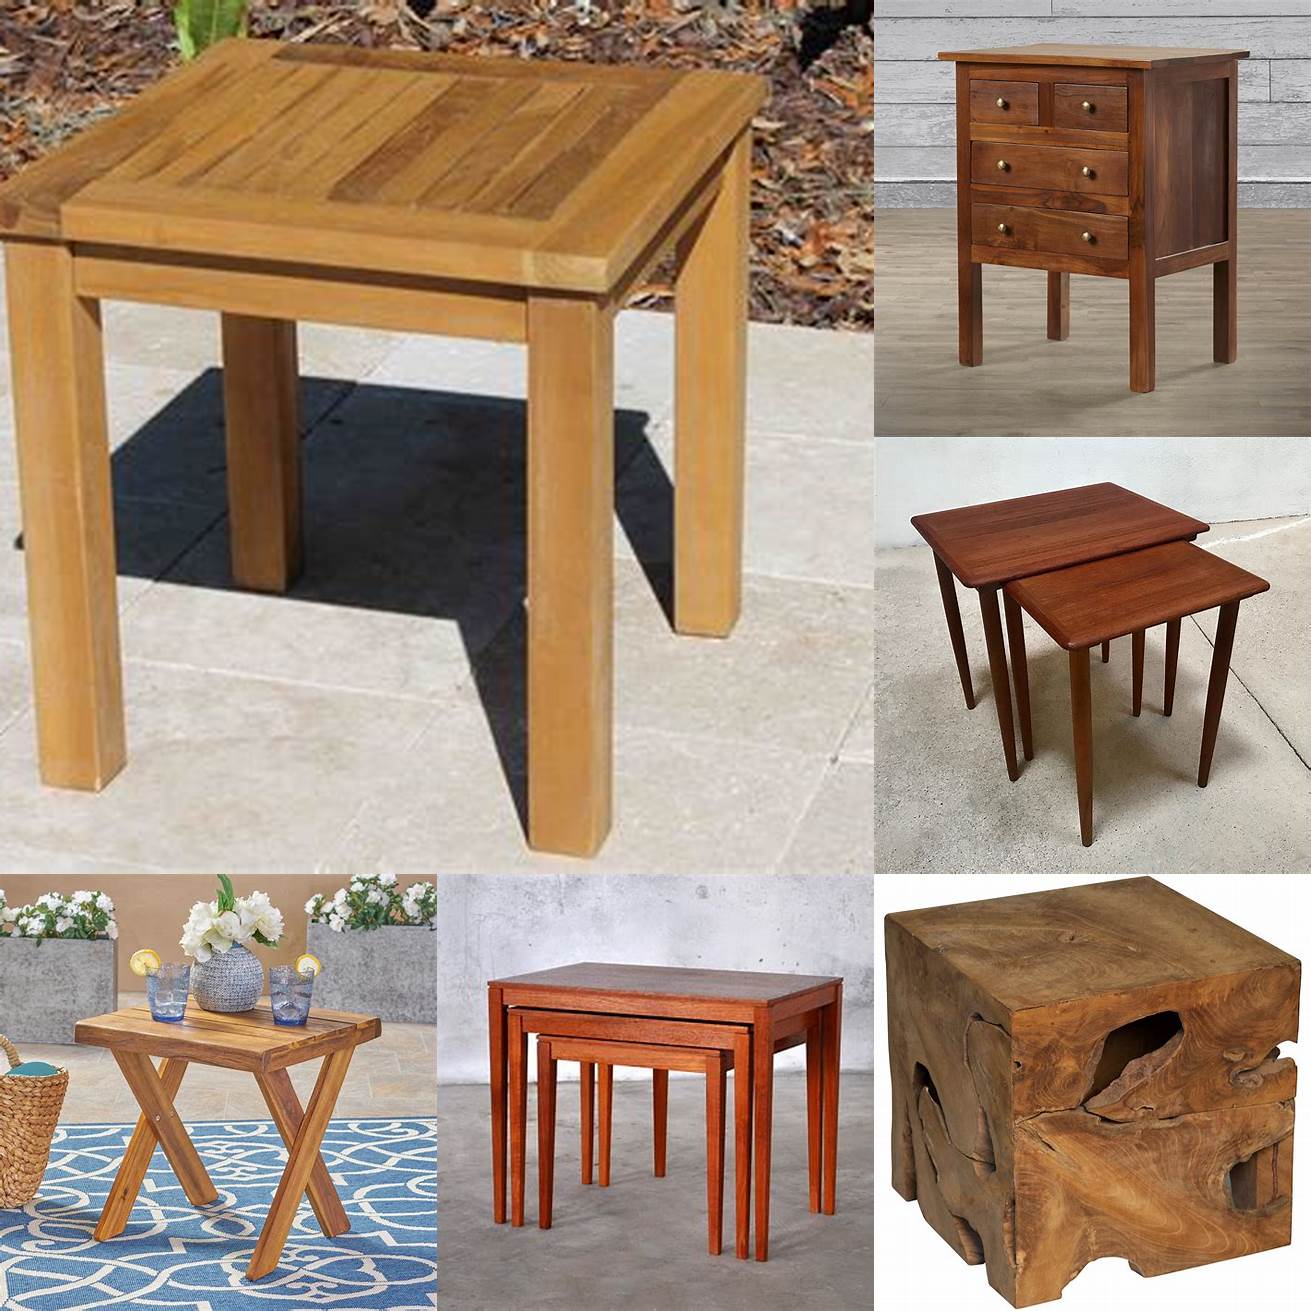 A picture of a side table made of teak